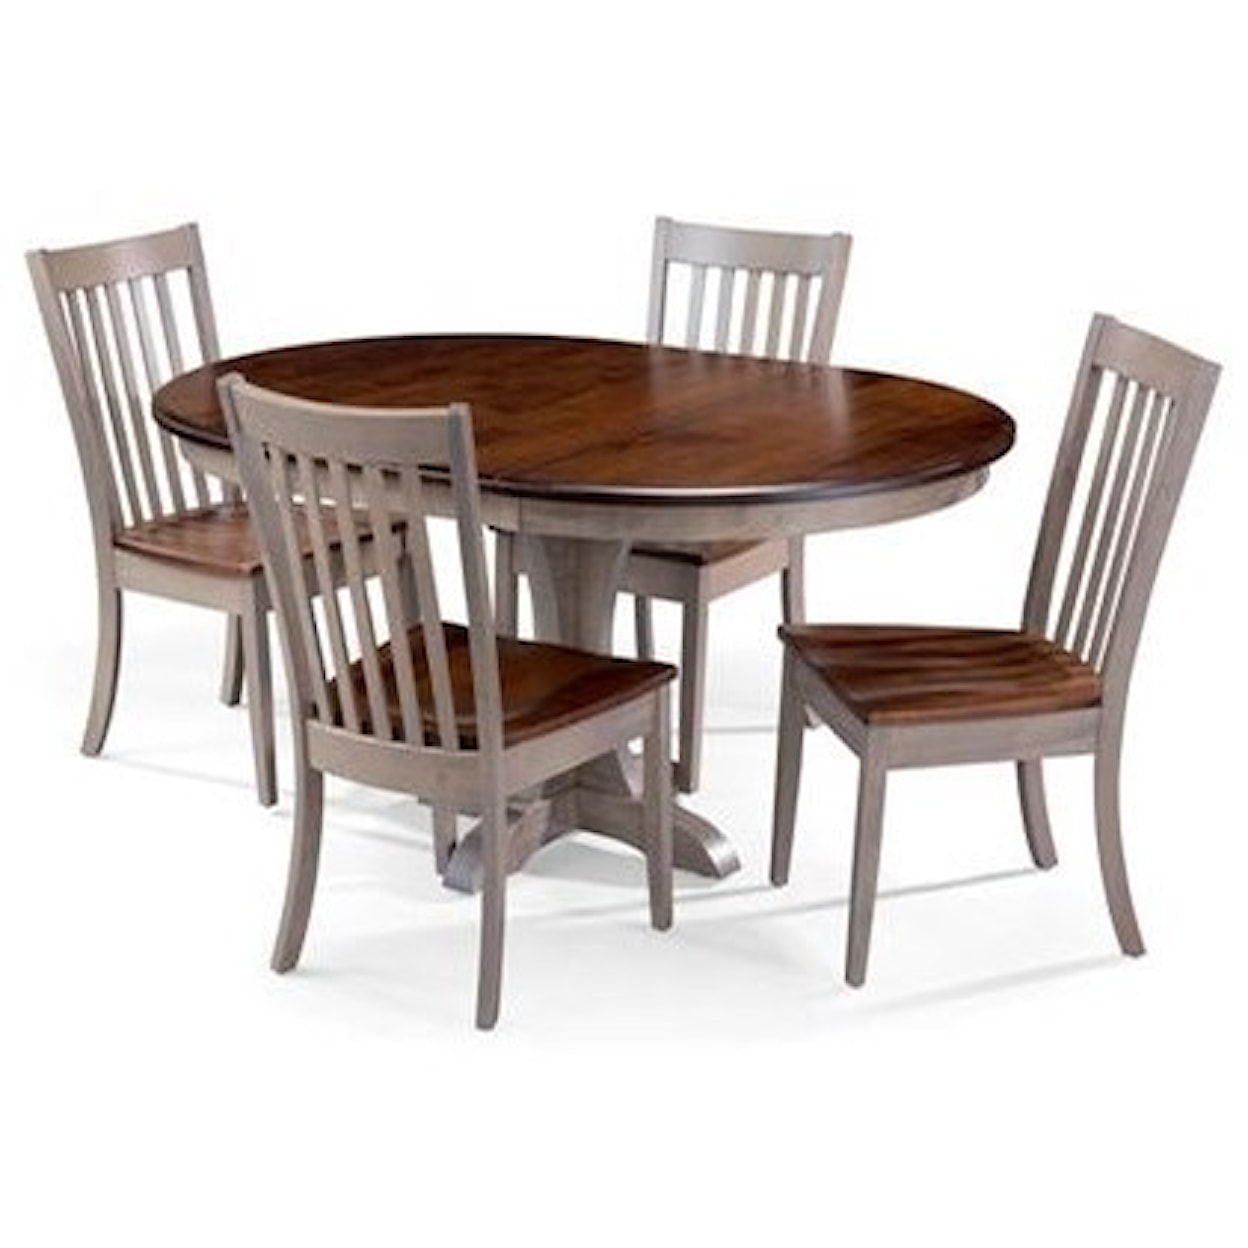 Archbold Furniture Amish Essentials Casual Dining 5 Piece Dining Set